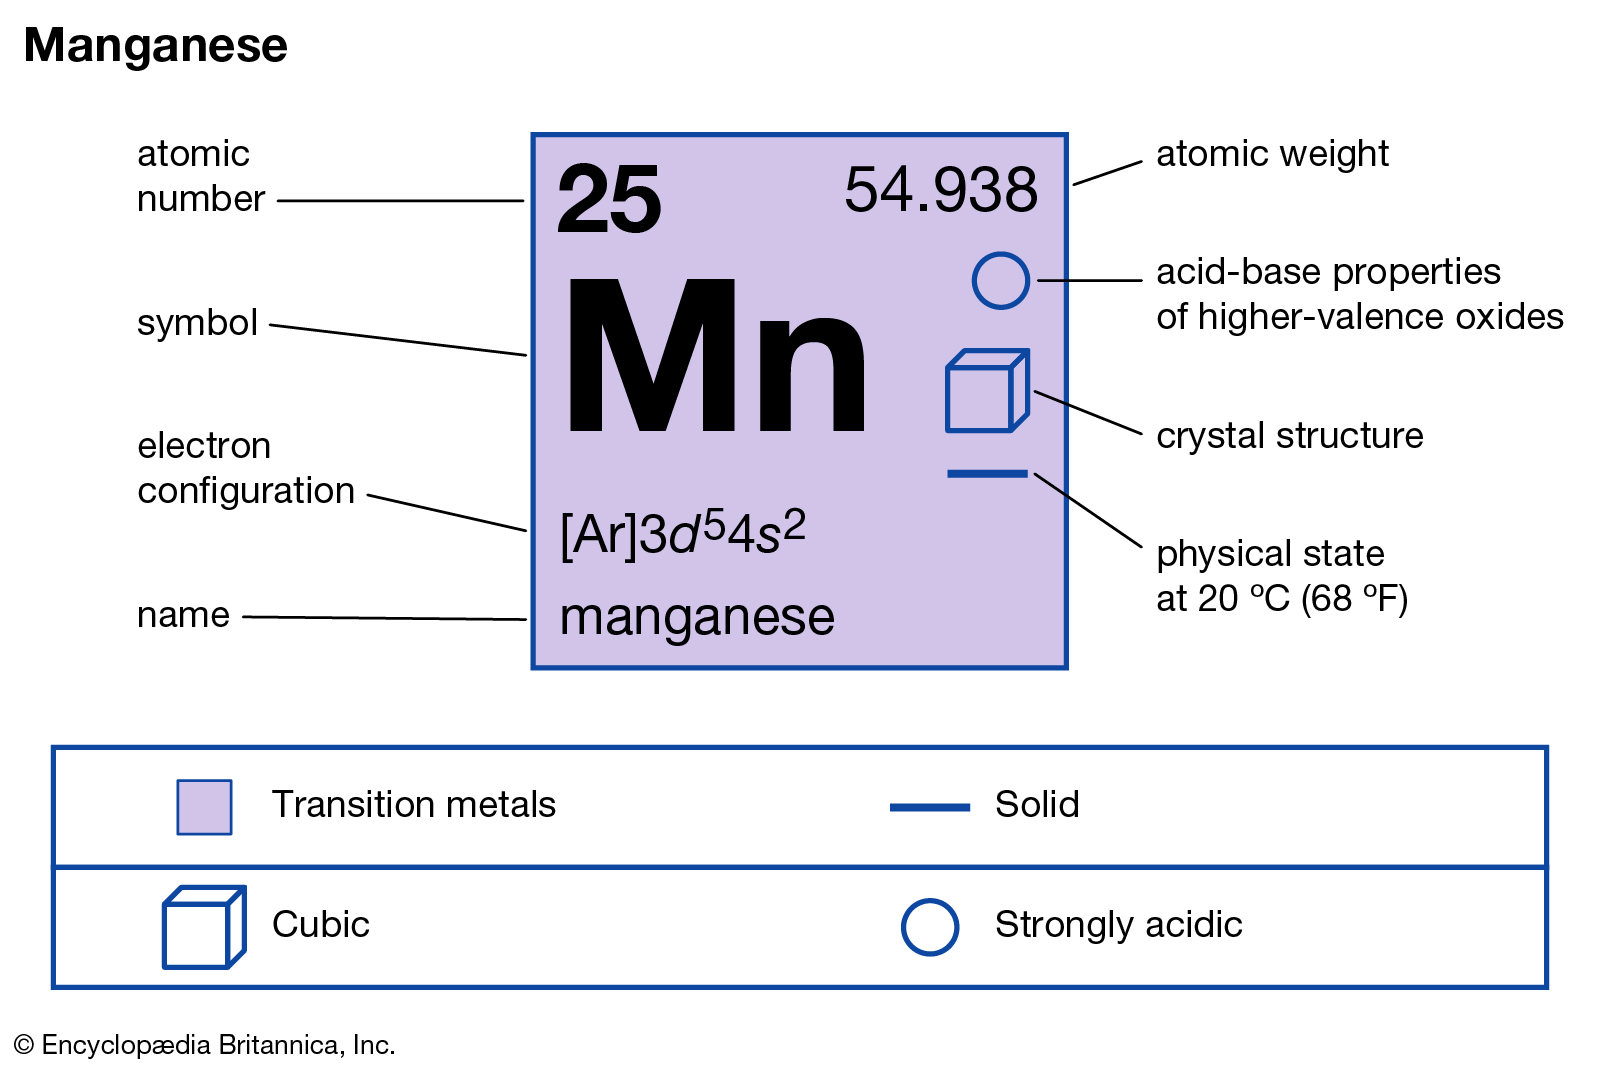 hinh-anh-interesting-facts-about-manganese-52-0